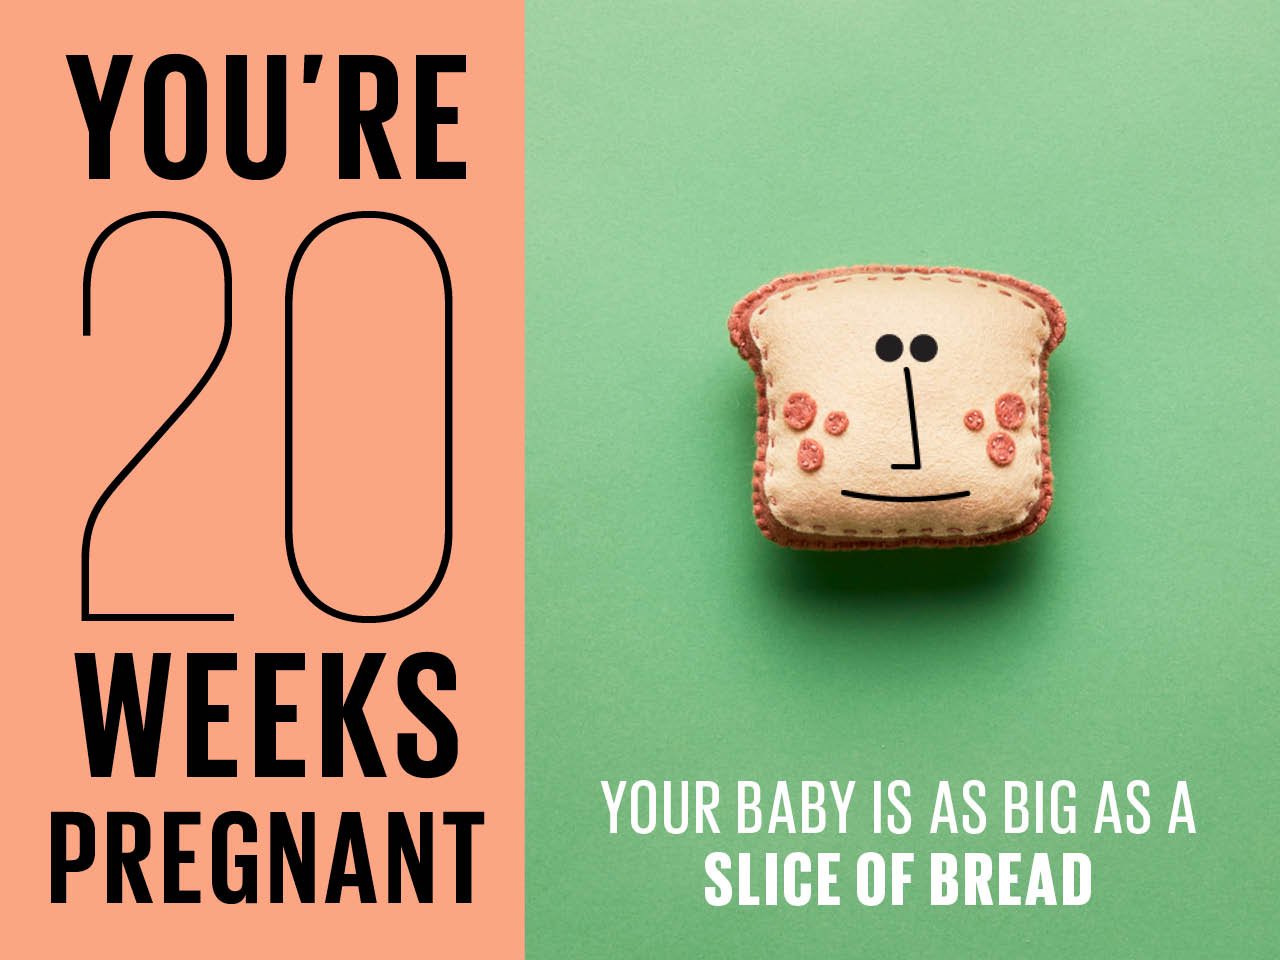 Felt slice of bread used to show how big baby is at 20 weeks pregnant